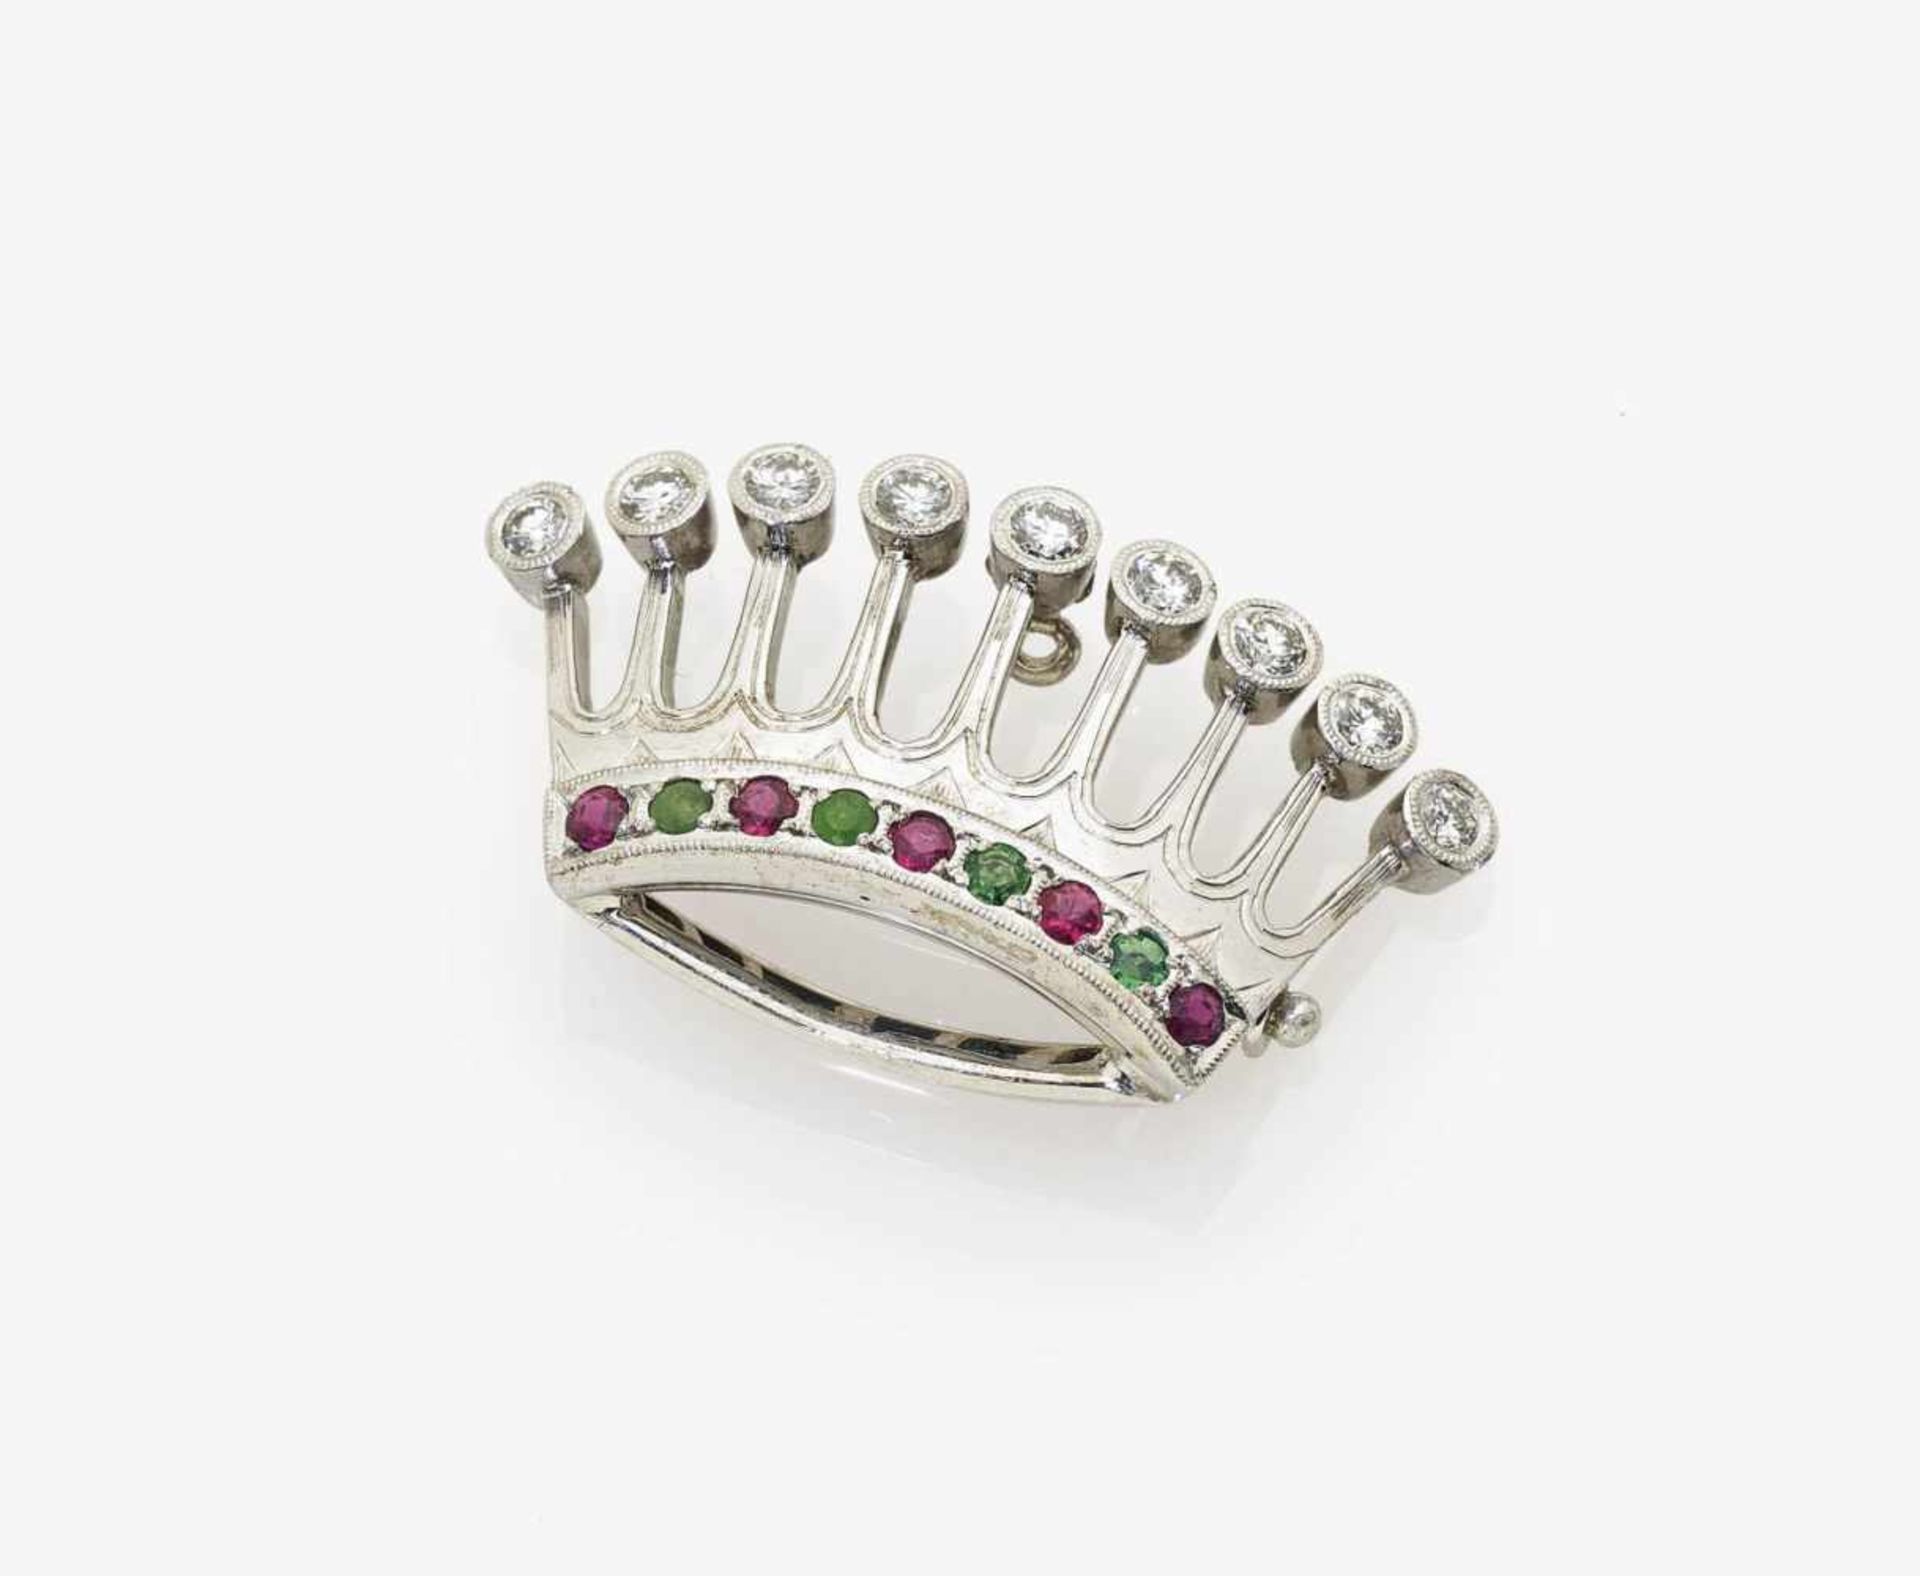 A Diamond, Ruby and Emerald Brooch in the Form of a Crown